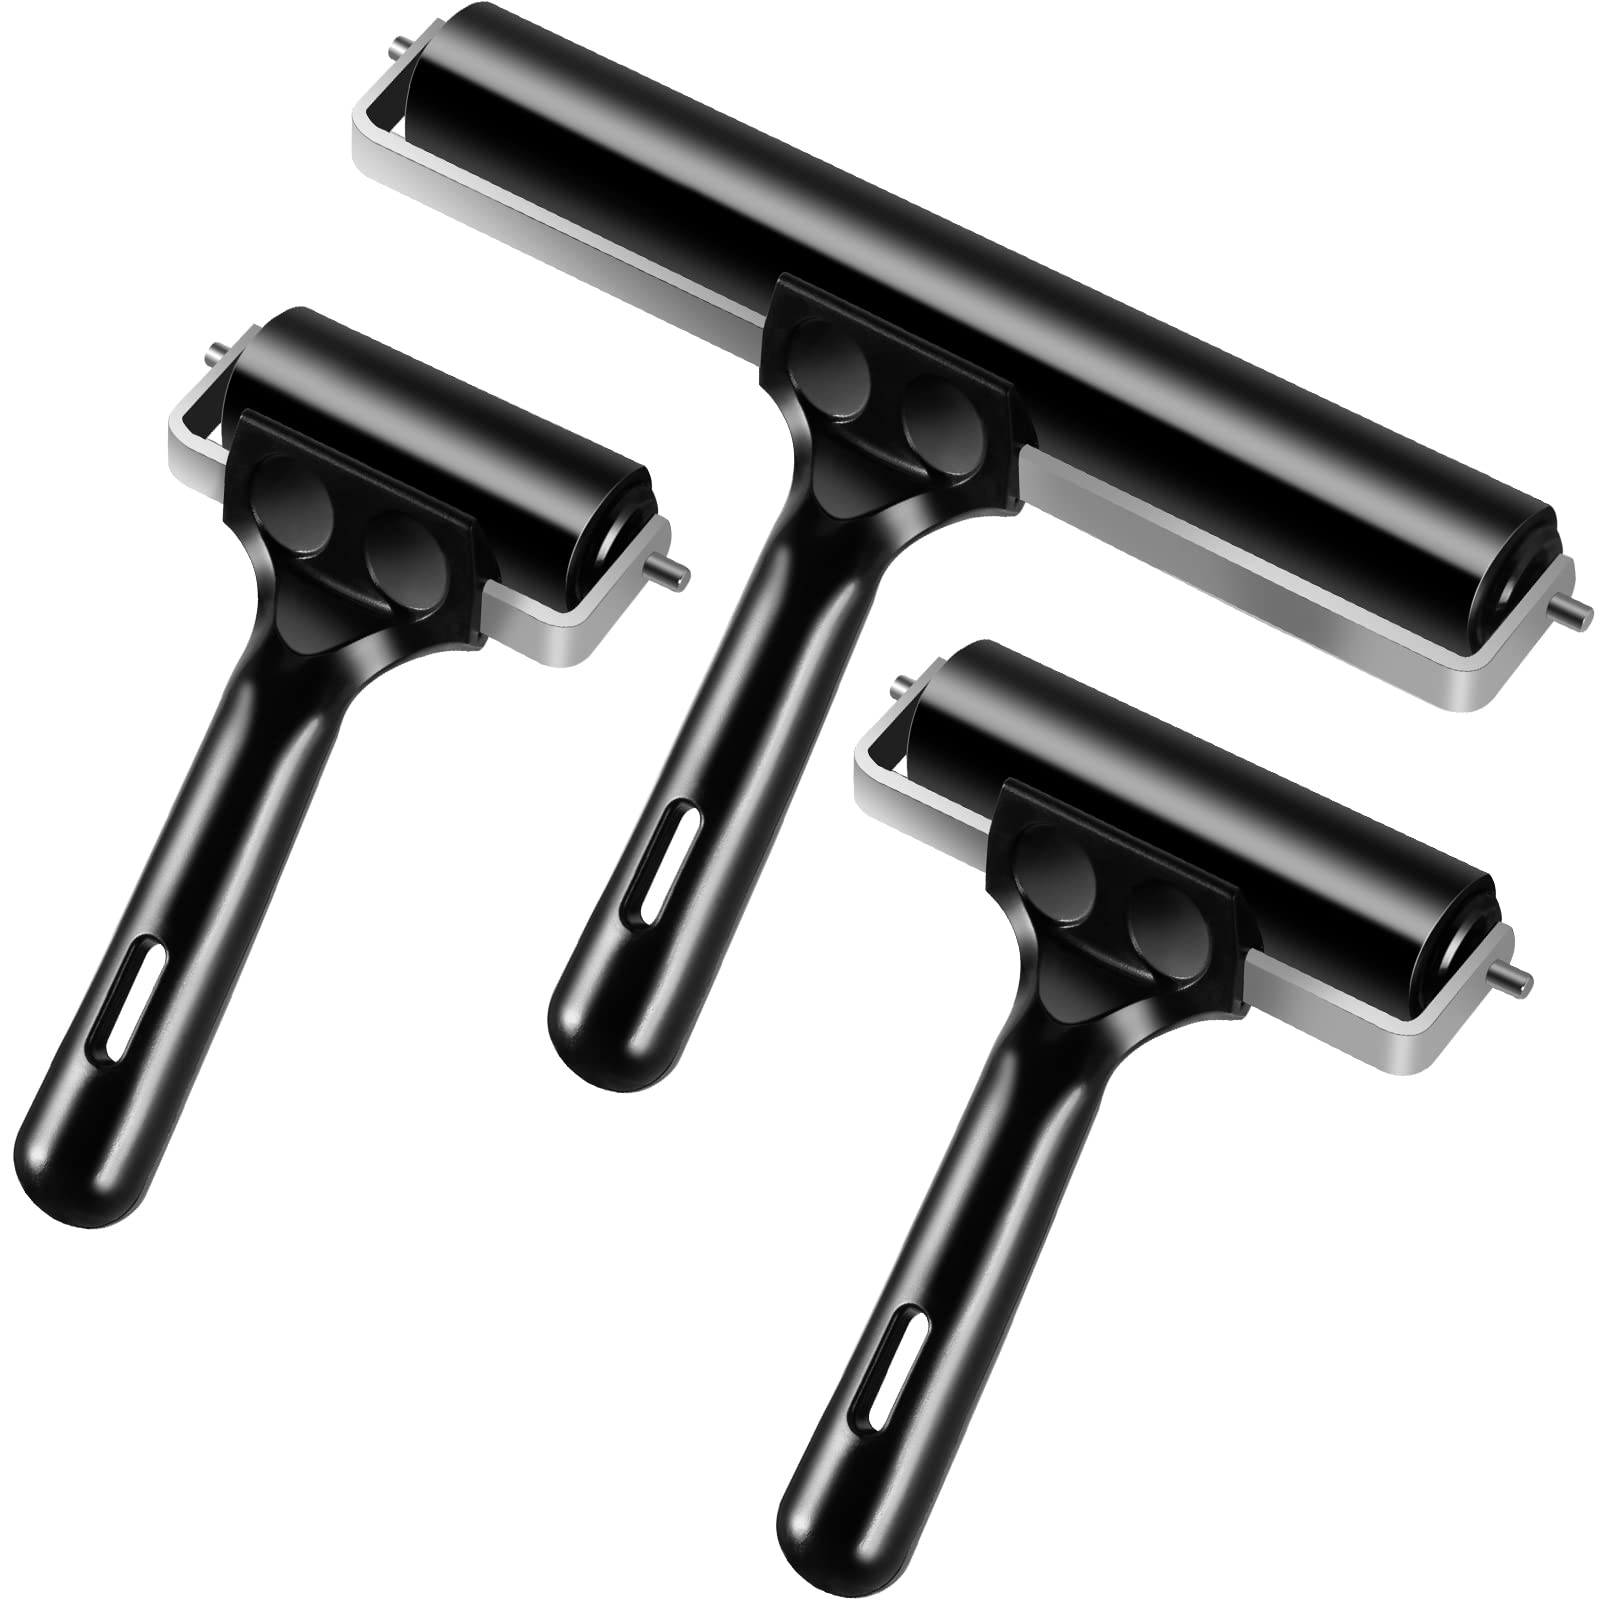 3 Pack Brayer Rollers for Crafting Vinyl Rubber Roller Brayers Printmaking  Brayer Rollers for Cricut Maker Gluing Printing Inking and Stamping(Black)  Balck